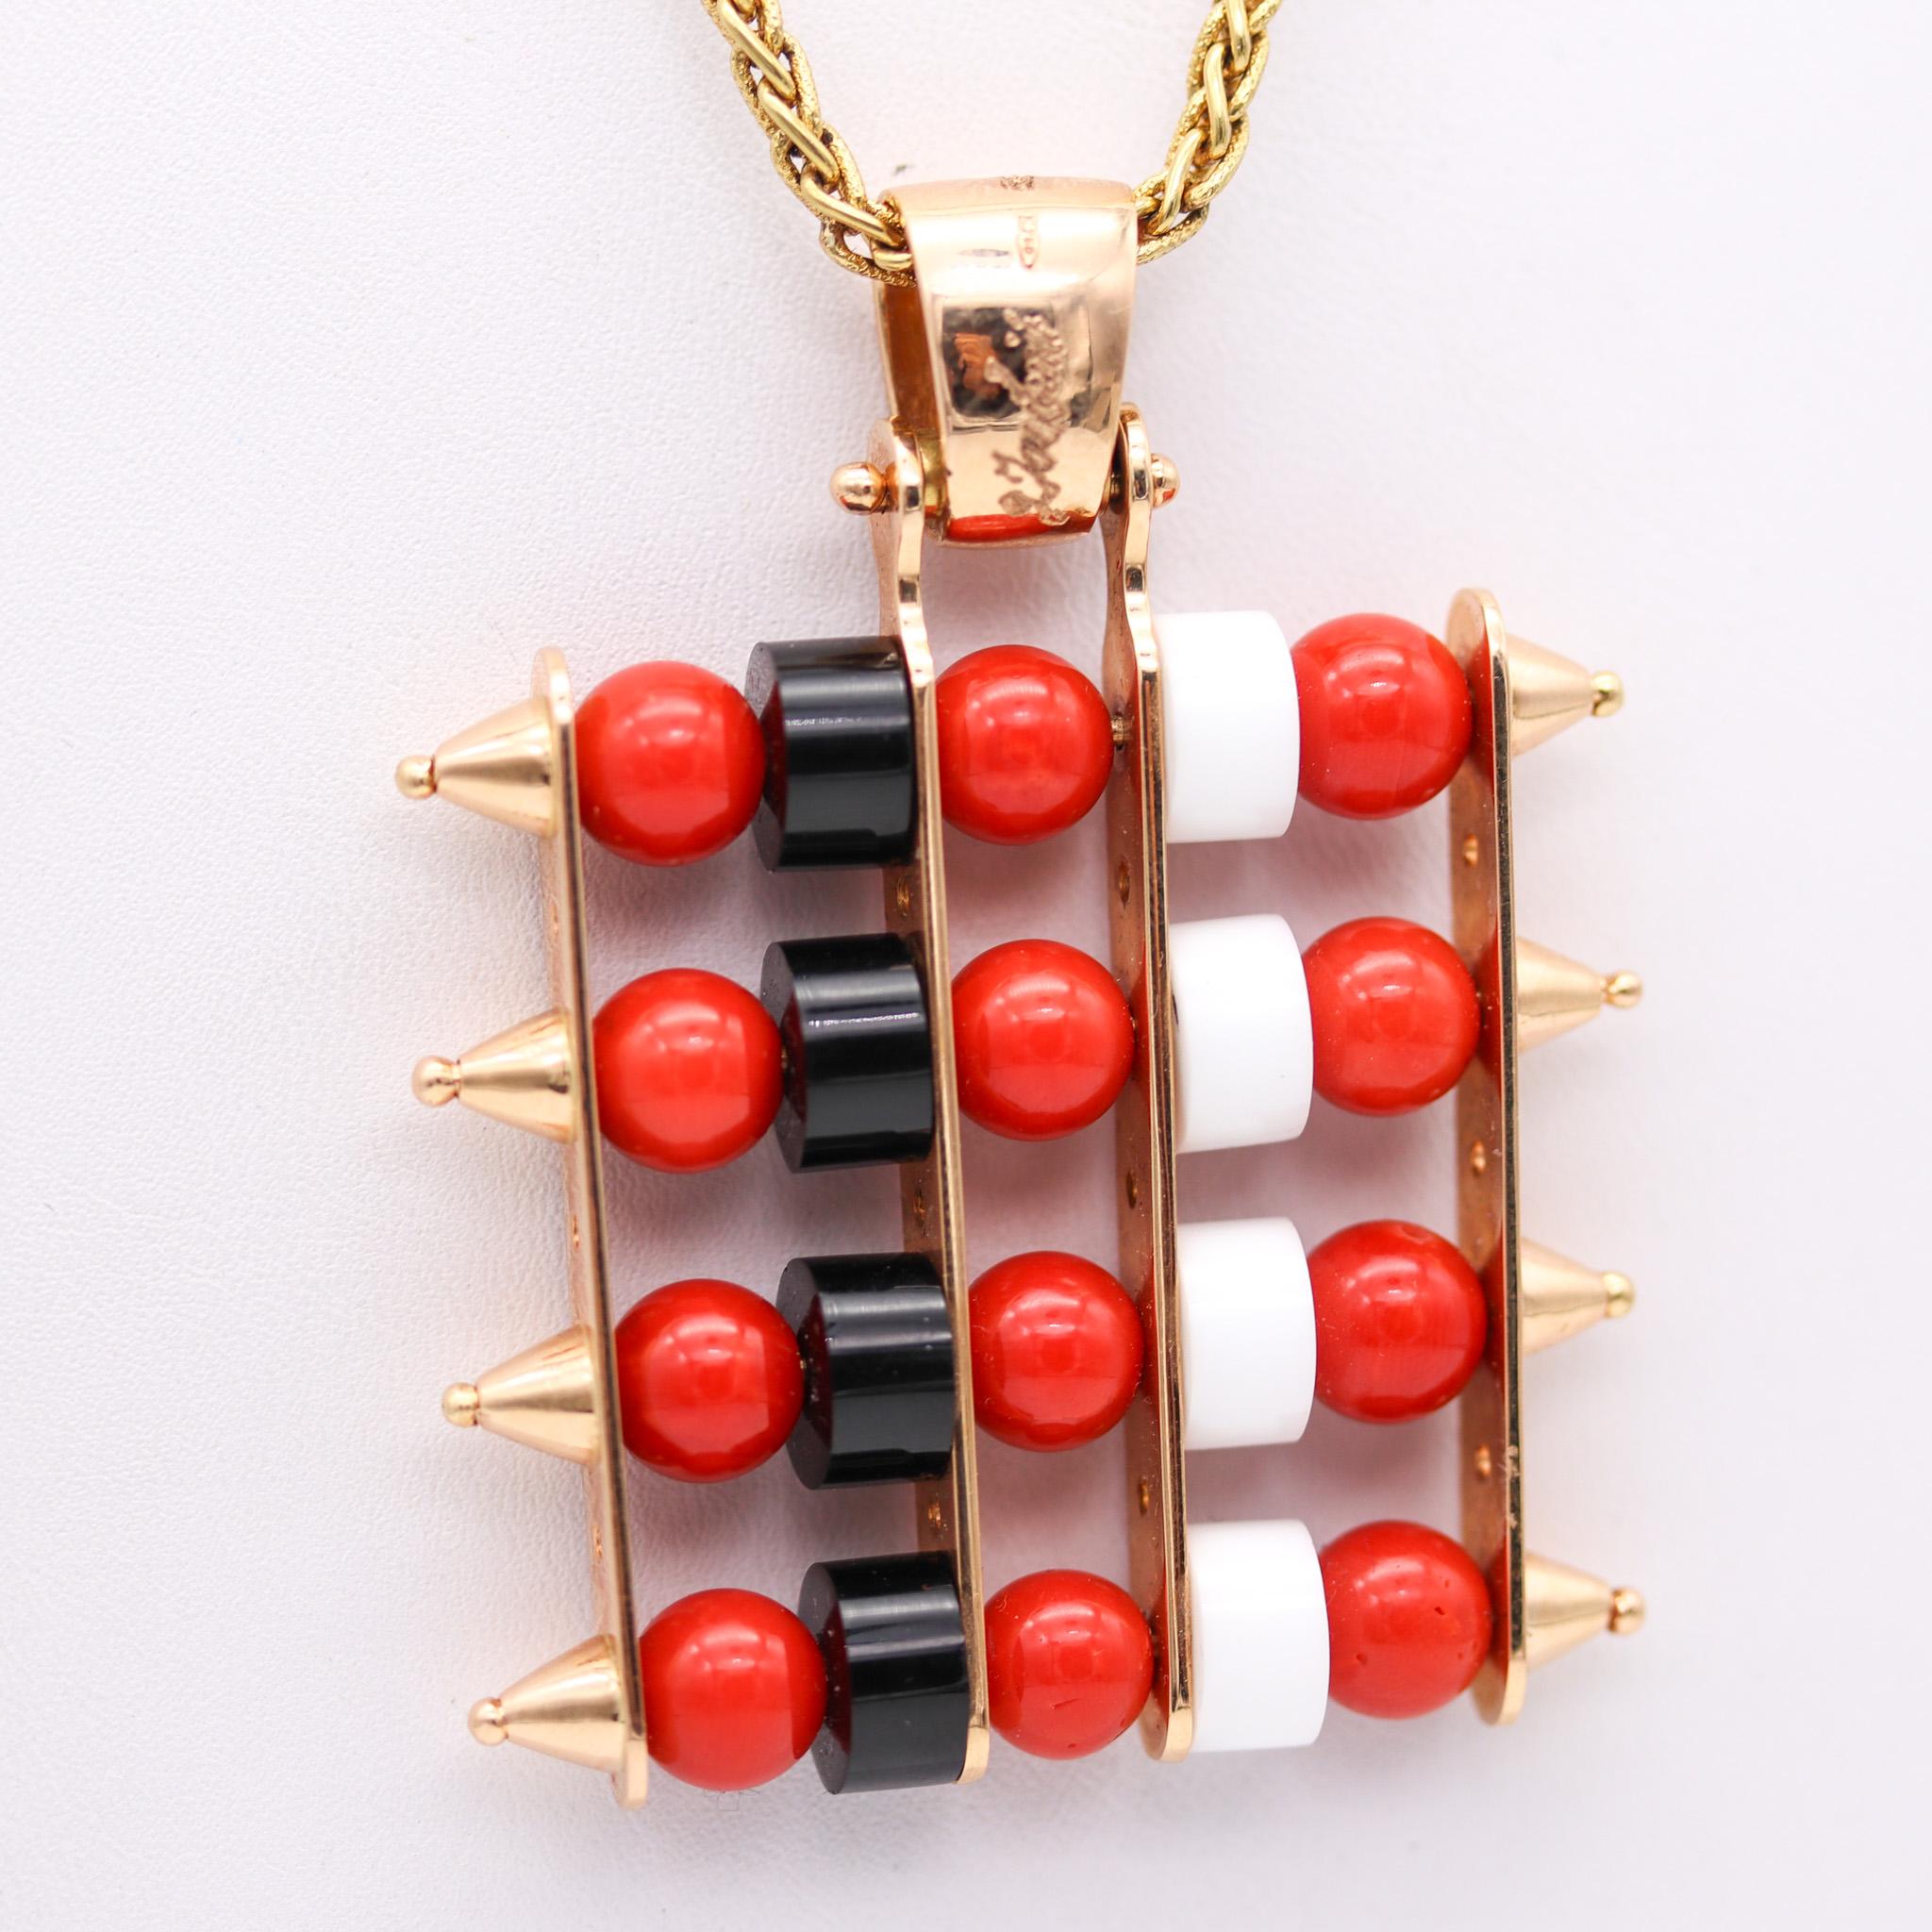 Orbital necklace designed by Giorgio Facchini (Pesaro 1947-).

A statement abacus pendant, created by the Italian master jeweler, artist and sculptor, Giorgio Facchini. This is a one of kind piece of wearable kinetic art, crafted in solid yellow